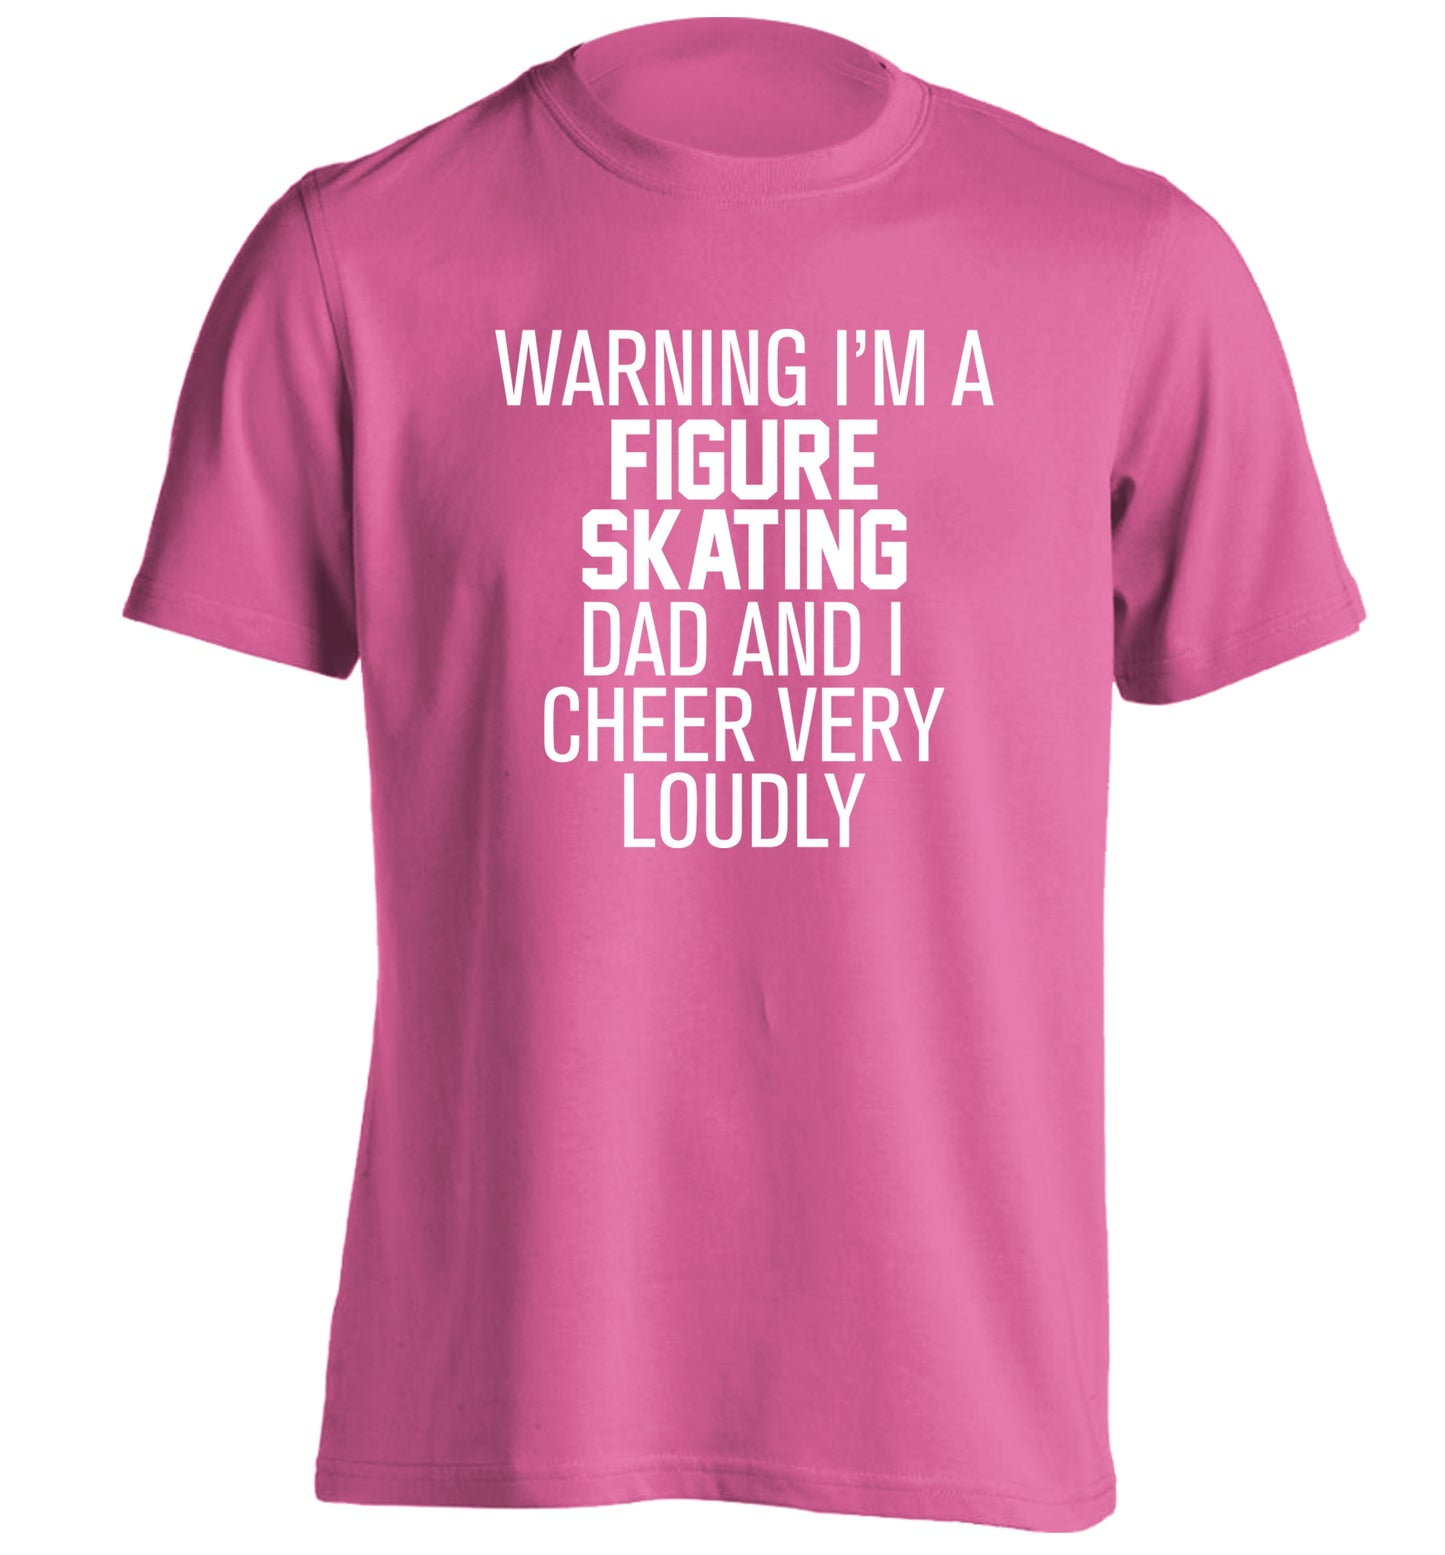 Warning I'm a figure skating dad and I cheer very loudly adults unisexpink Tshirt 2XL